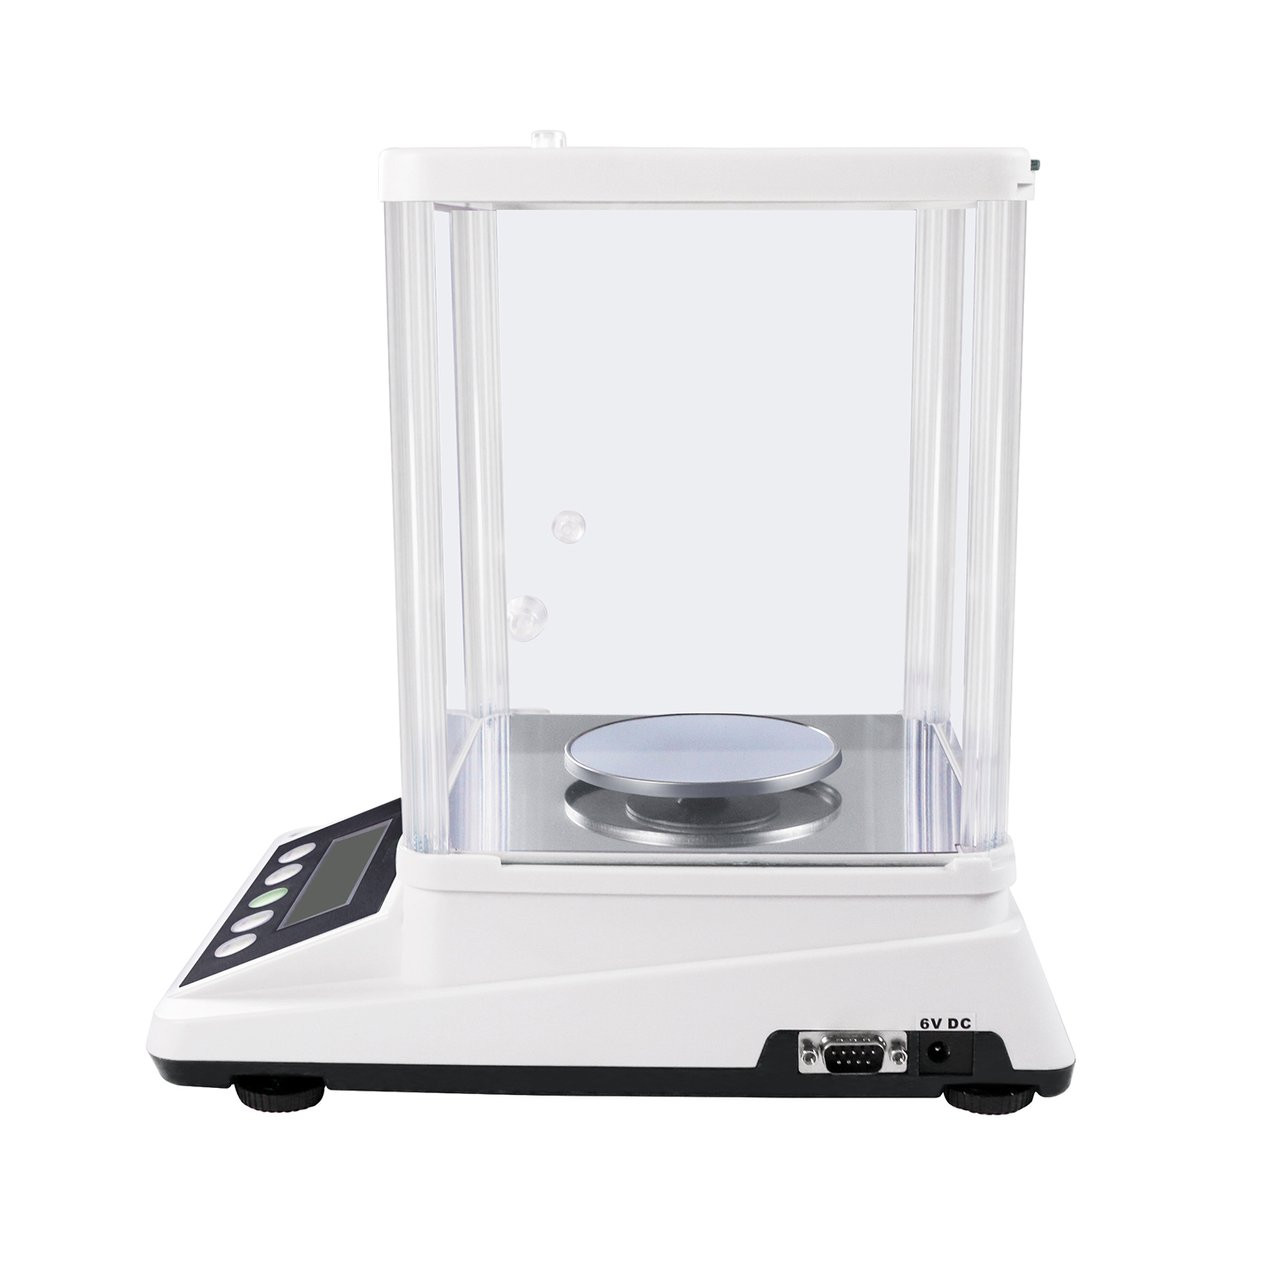 Digital Scale 11 lbs. or 5 kg with LCD Display and Sealed Buttons